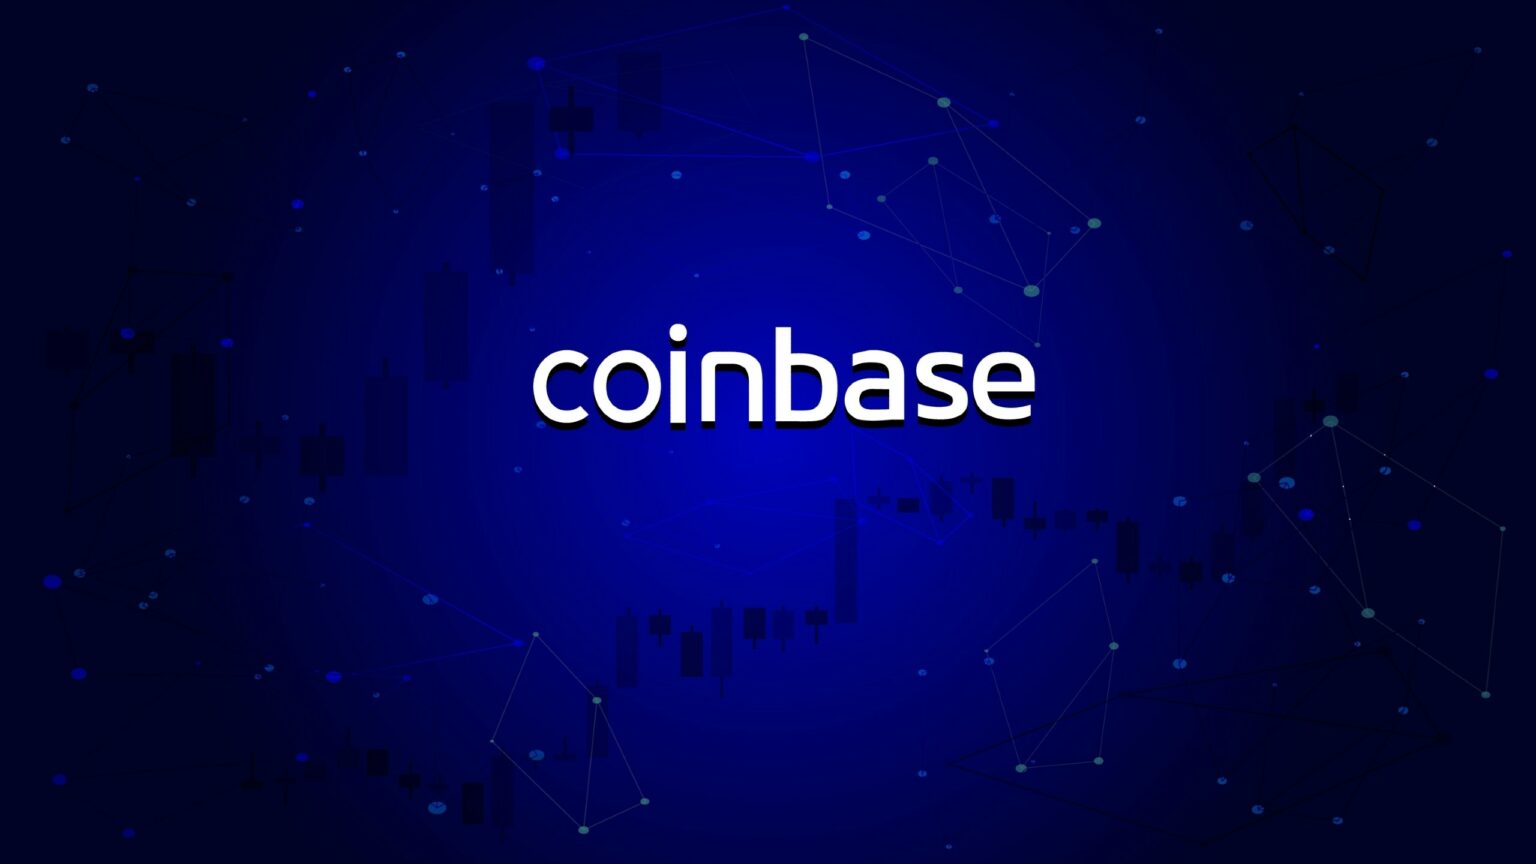 Coinbase Fights Back, Launches Counterattack on SEC Lawsuit